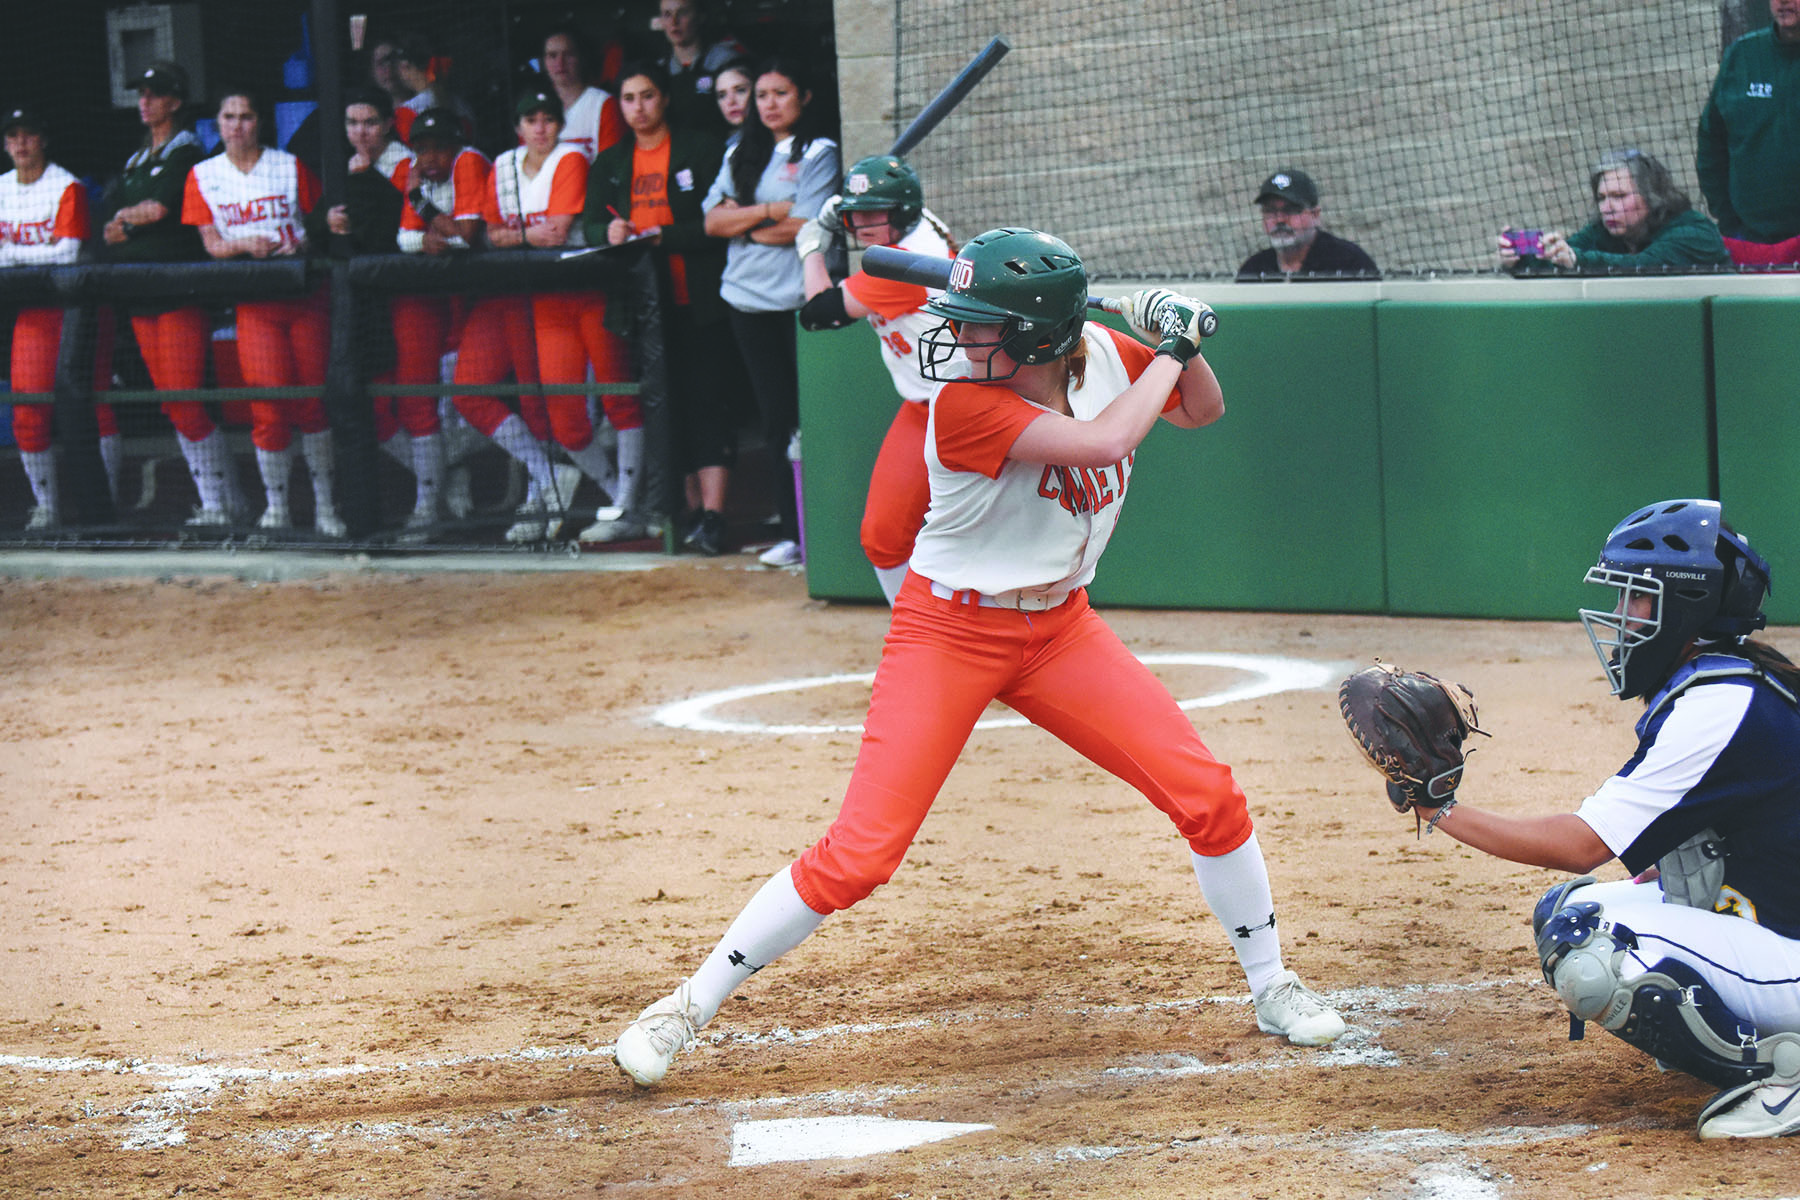 Softball players earn national recognition